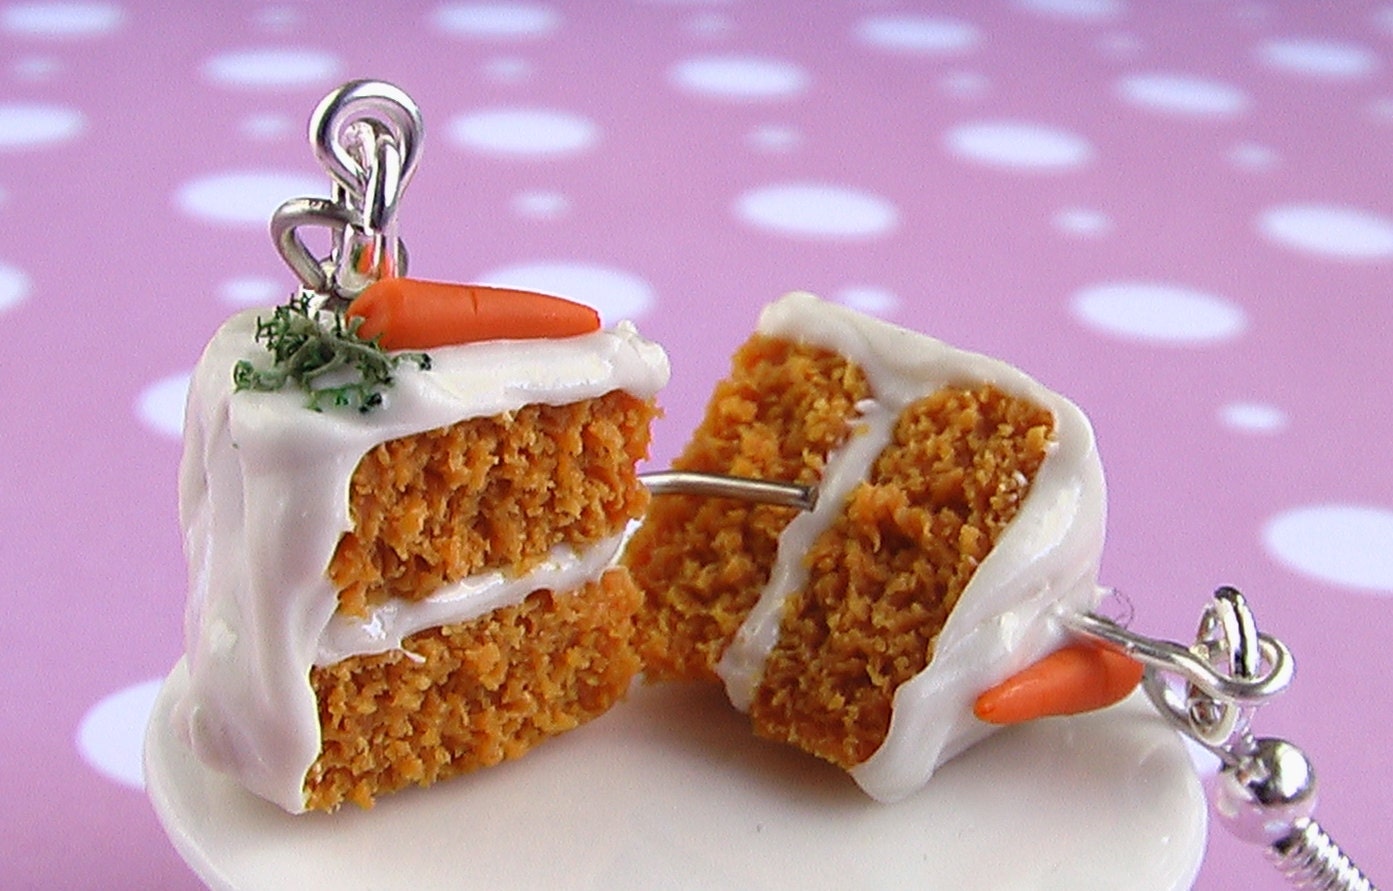 Cake Earrings Luscious Carrot Earrings with Cream Cheese Frosting - mousemarket